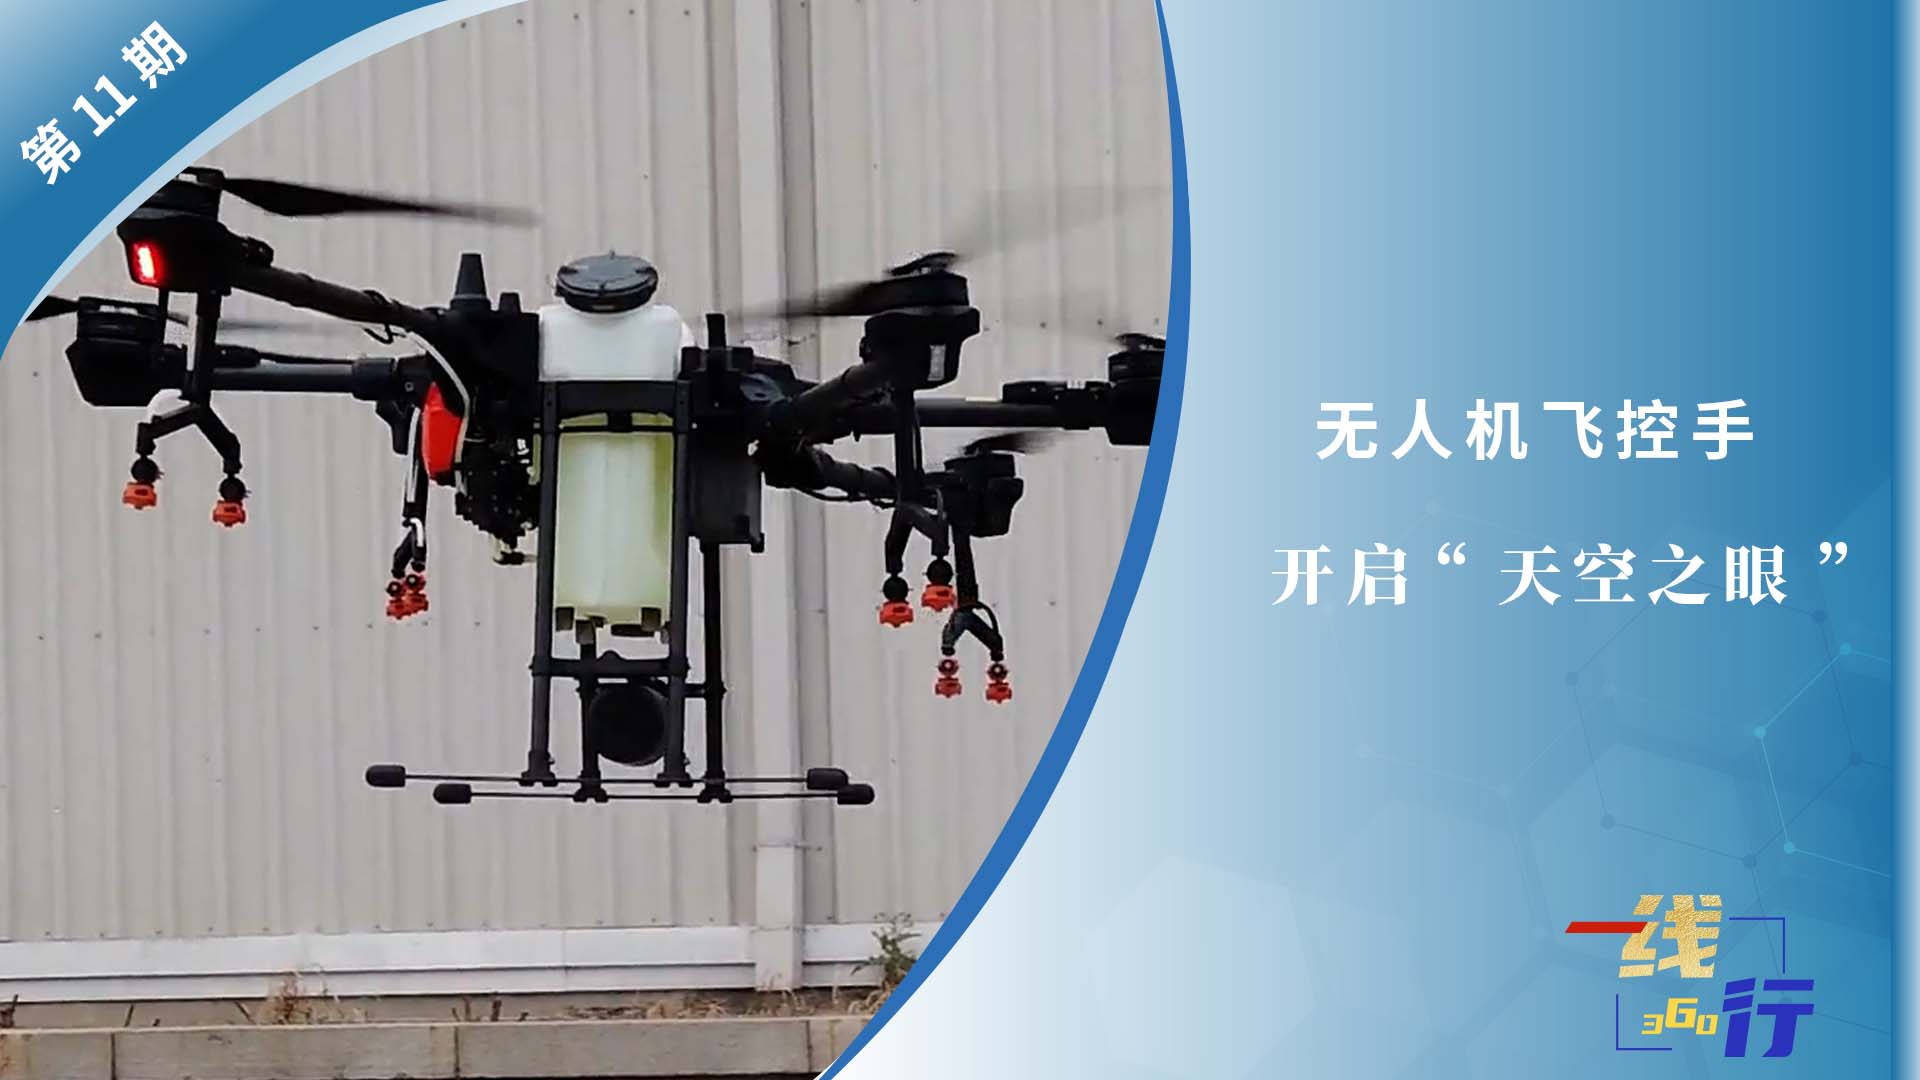  [First line: 360 lines] UAV flight controller: open the "eye of the sky"